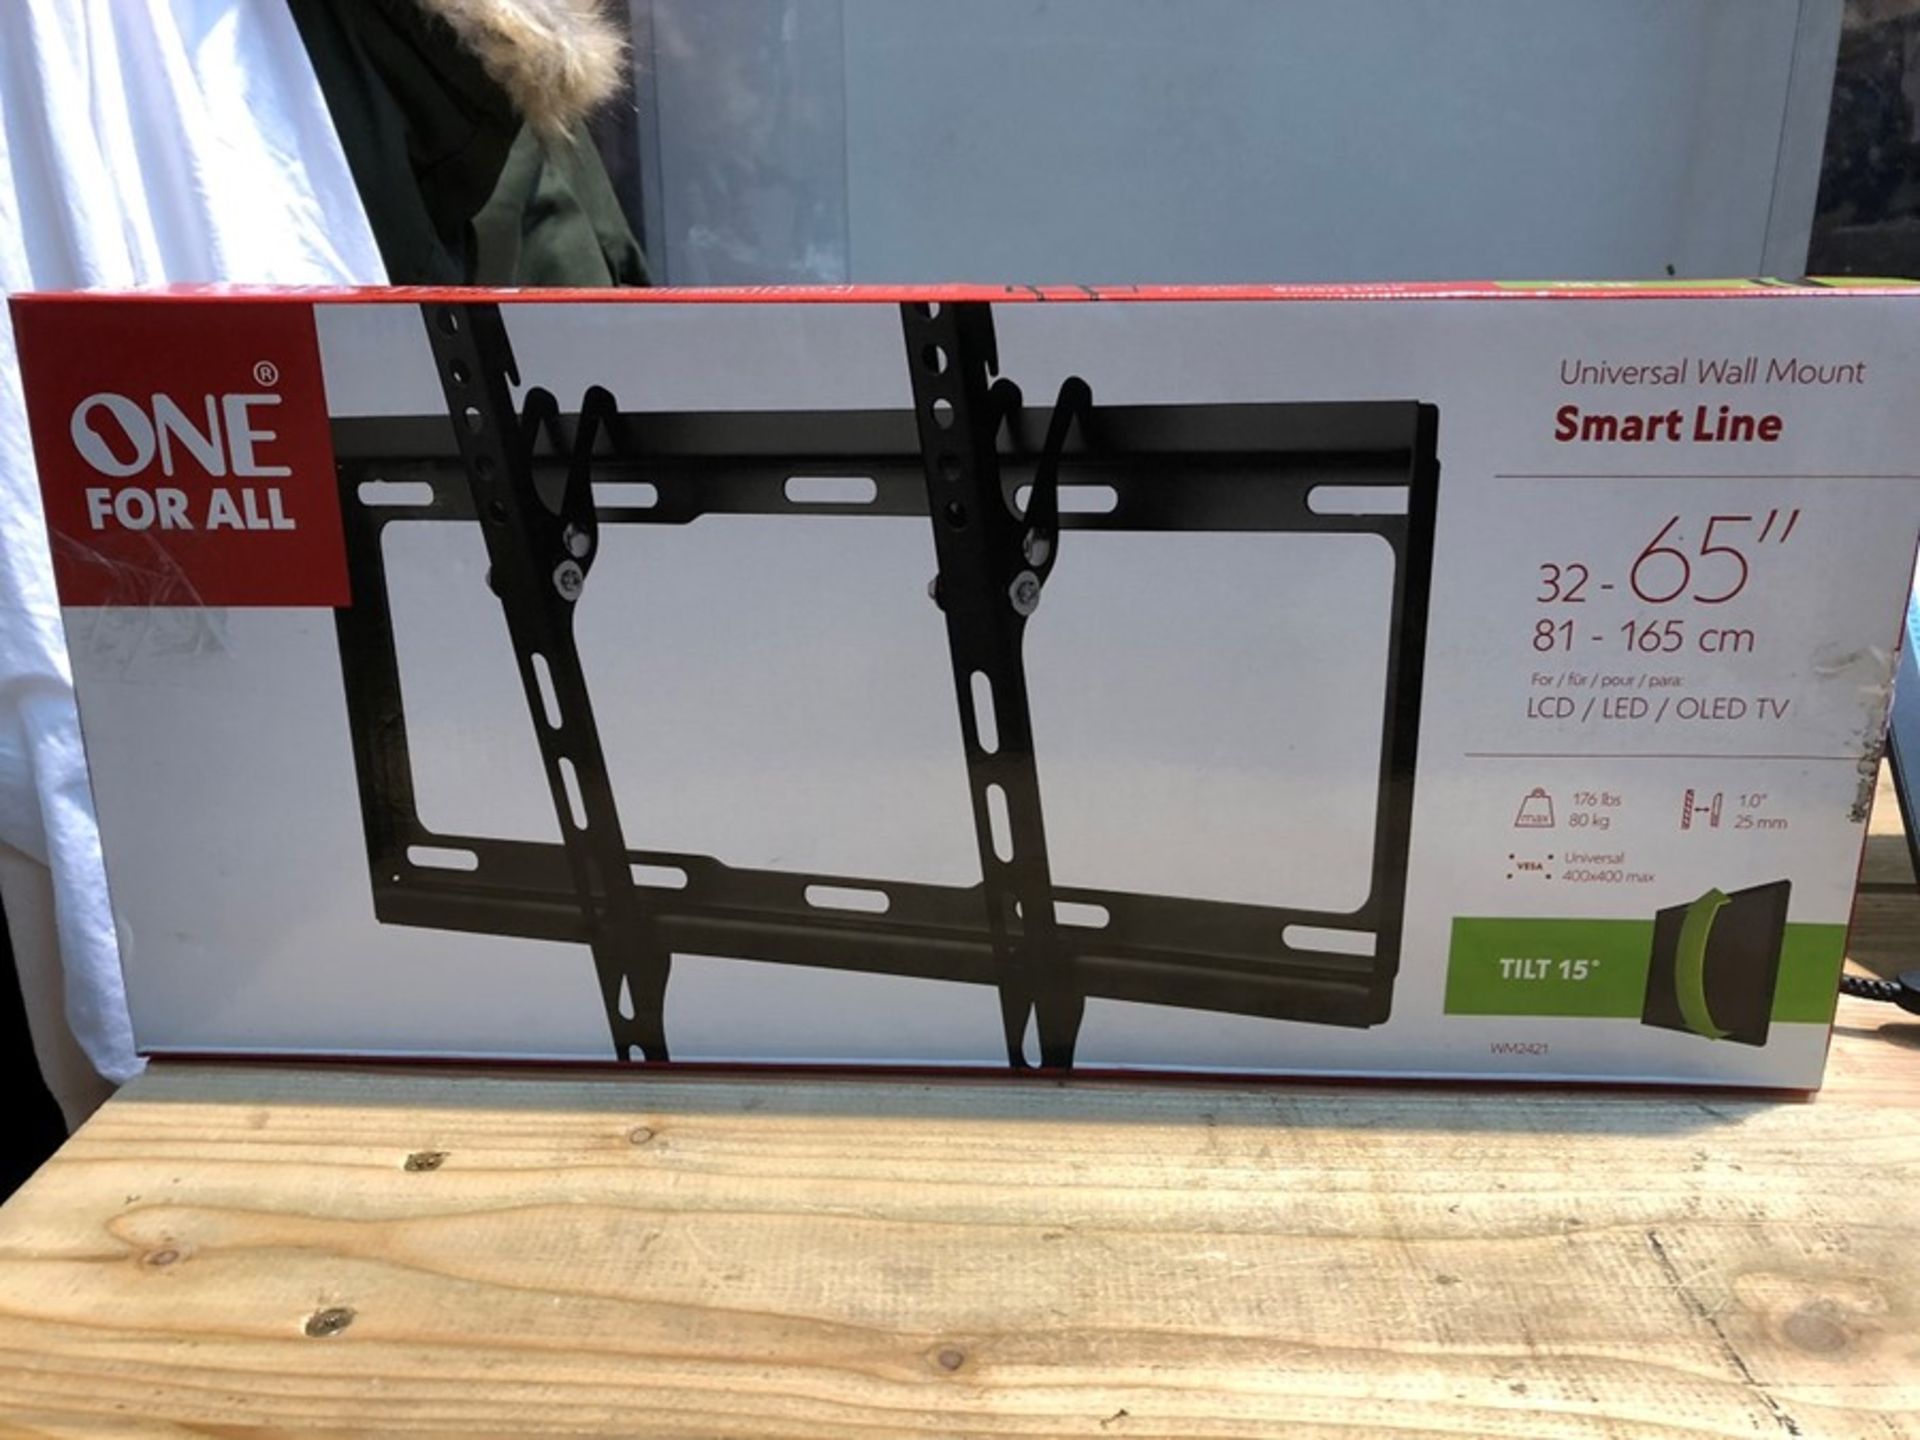 1 BOXED ONE FOR ALL UNIVERSAL WALL MOUNT SMART LINE WITH 15 DEGREE TILT - WM2421 / SIZE: 32-65" OR